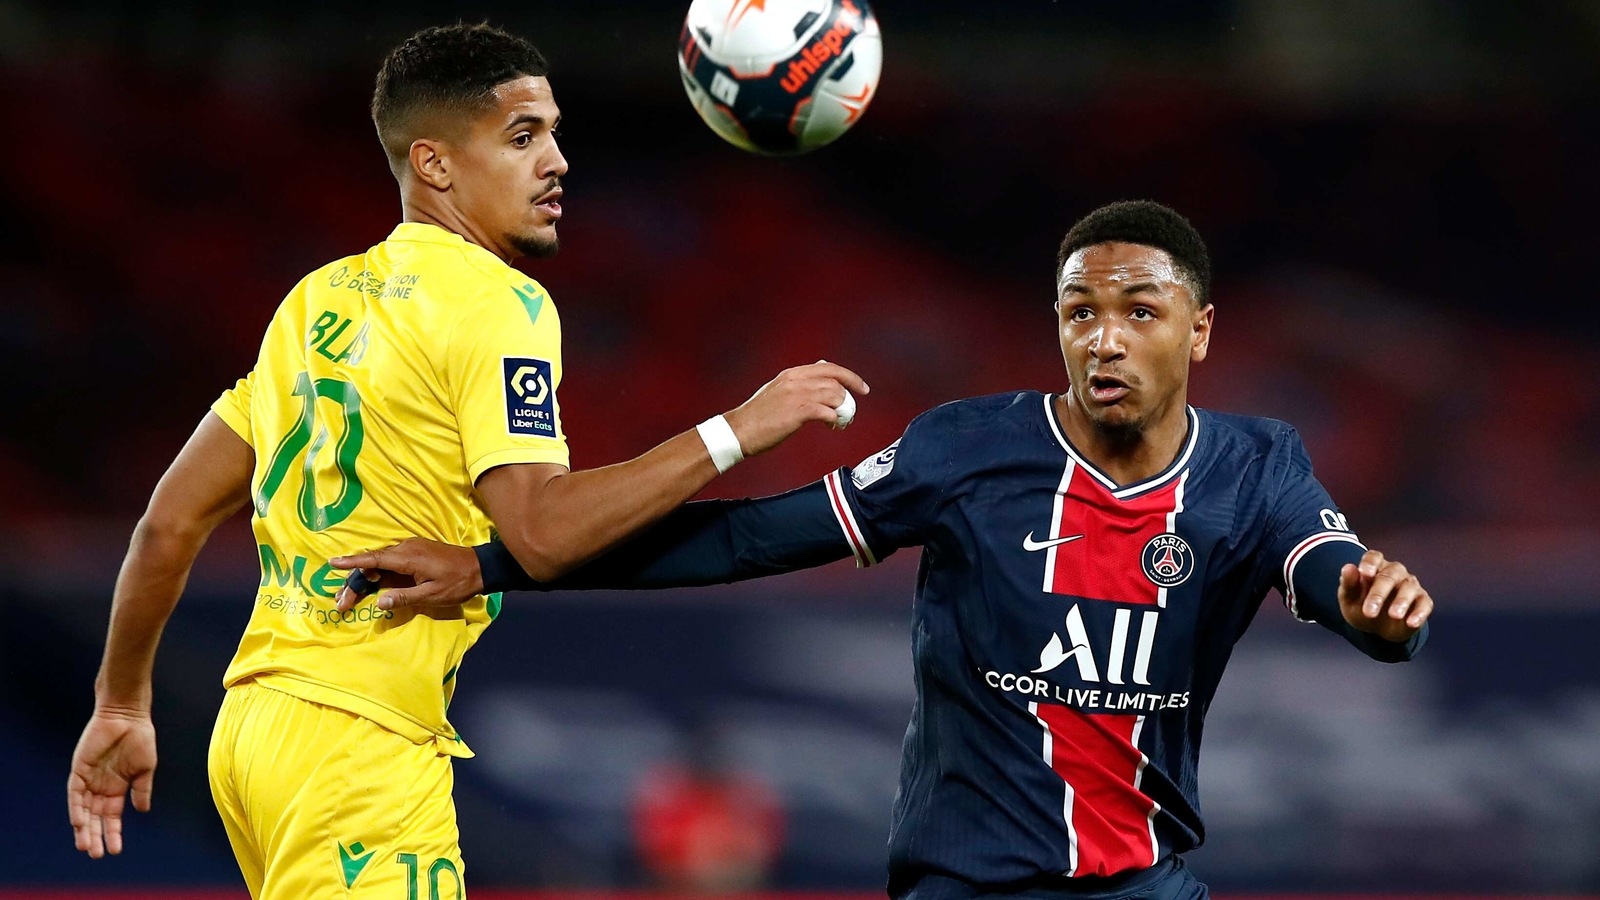 PSG lose at home to Nantes and falls 3 points behind Lille | Football ...